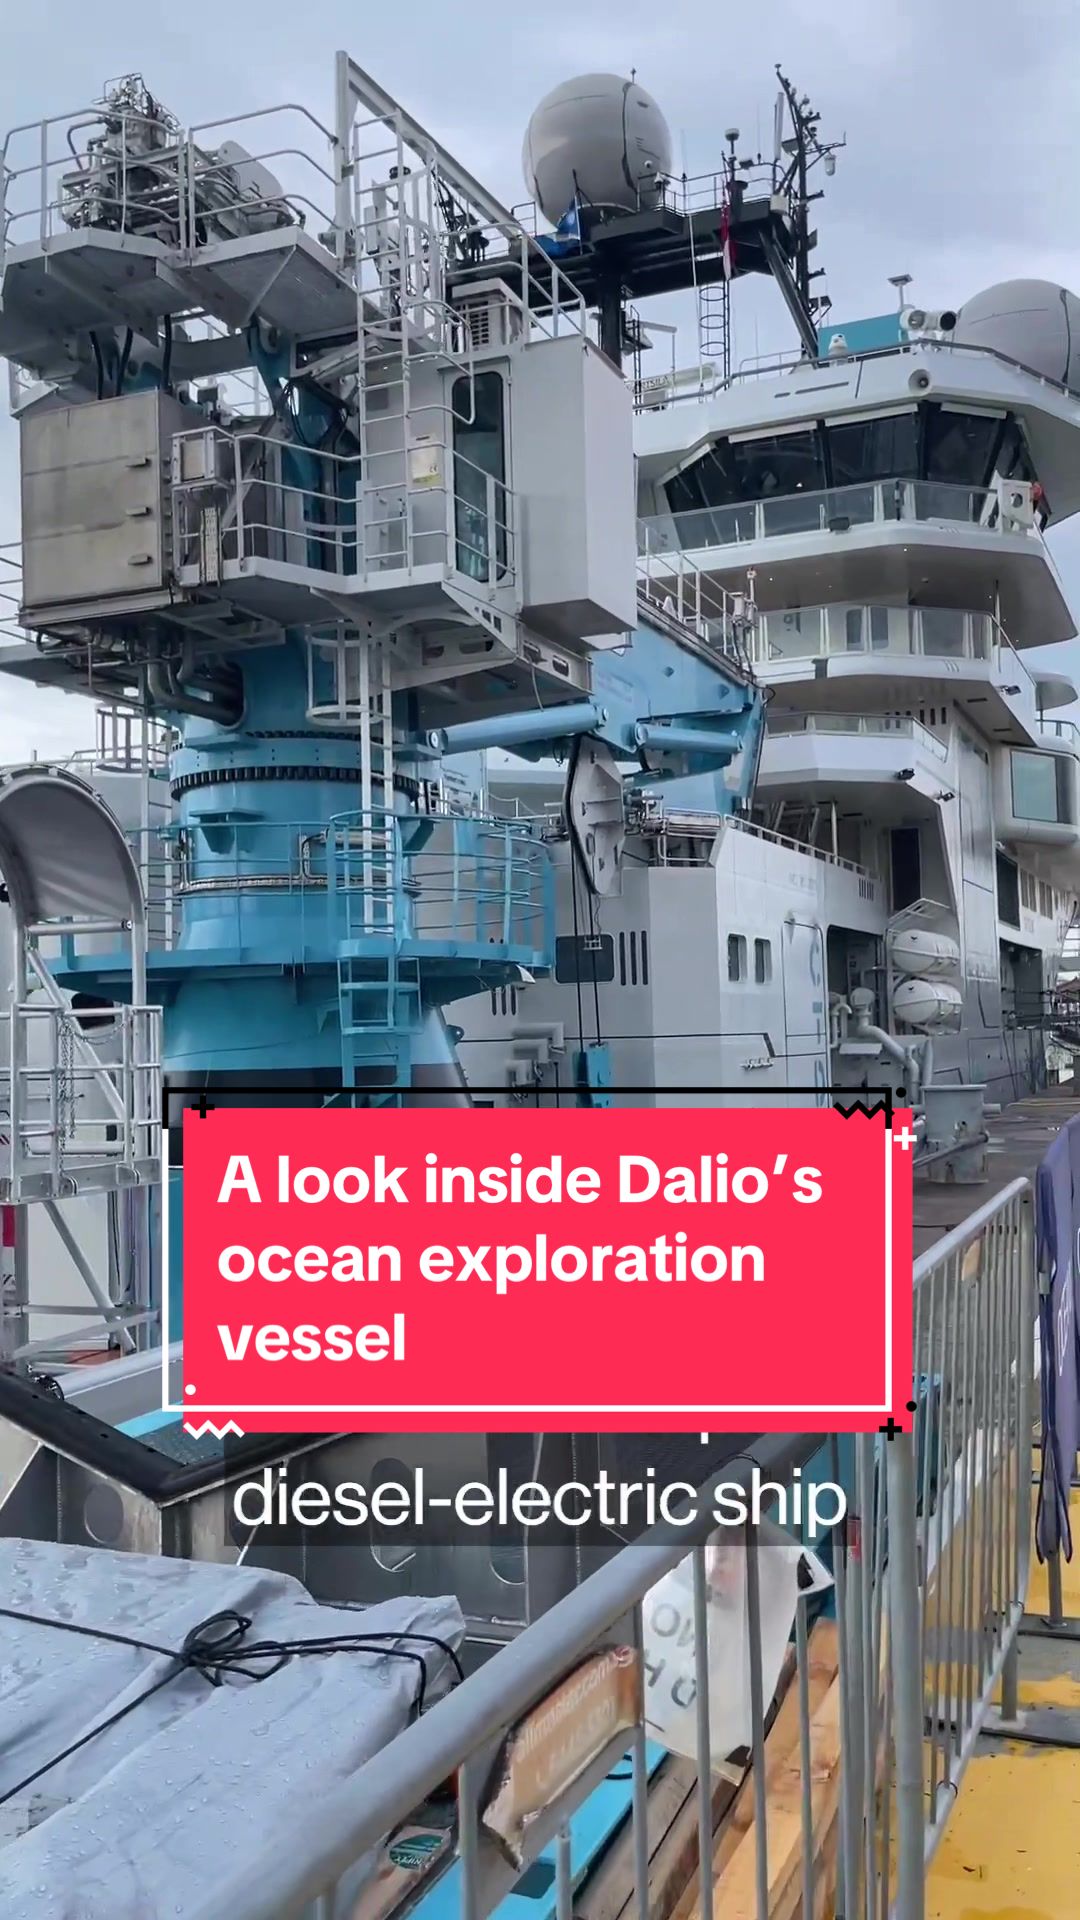 Some ships are built to set sail on a holiday cruise, but over at billionaire Ray Dalio’s philanthropic venture, they’ve got a vessel for ocean exploration. Here's a look inside the OceanXplorer that’s currently docked in #Singapore.  #climate #environment #dalio